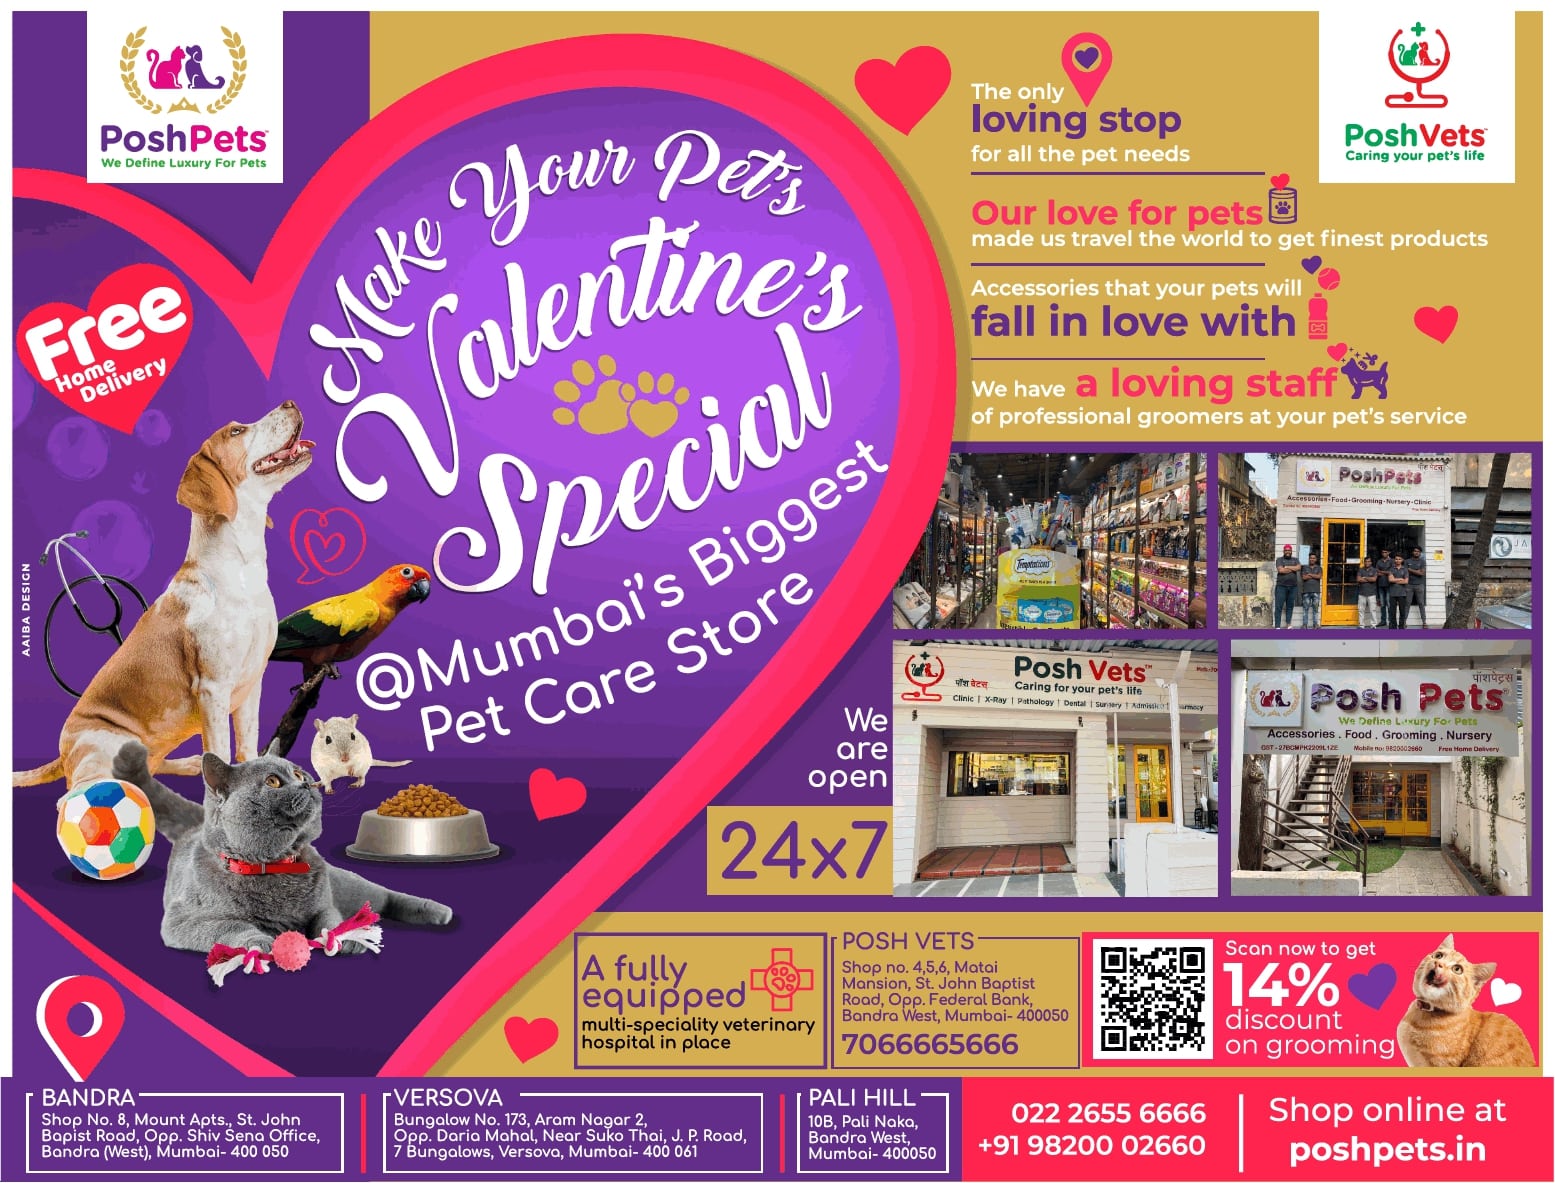 poshpets-make-your-pets-valentines-special-ad-bombay-times-13-02-2021